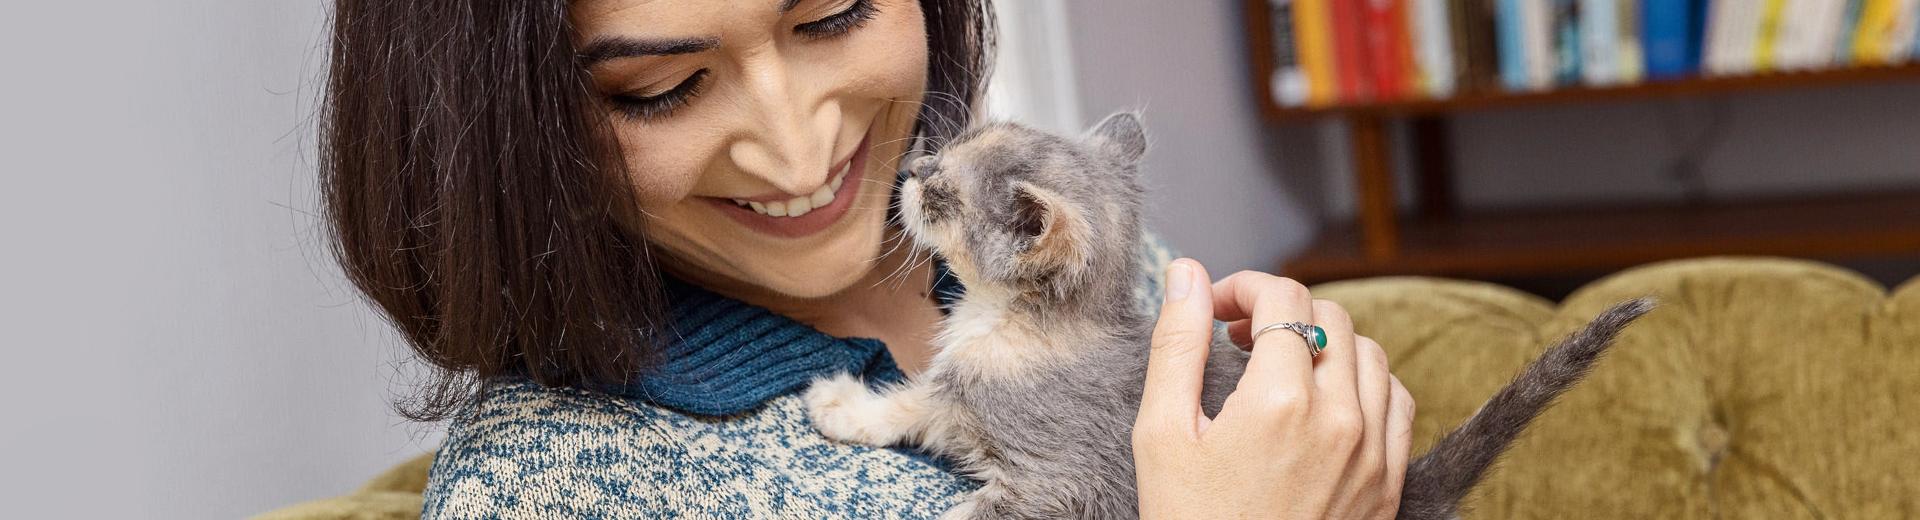 Smiling person holding a small dilute calico kitten